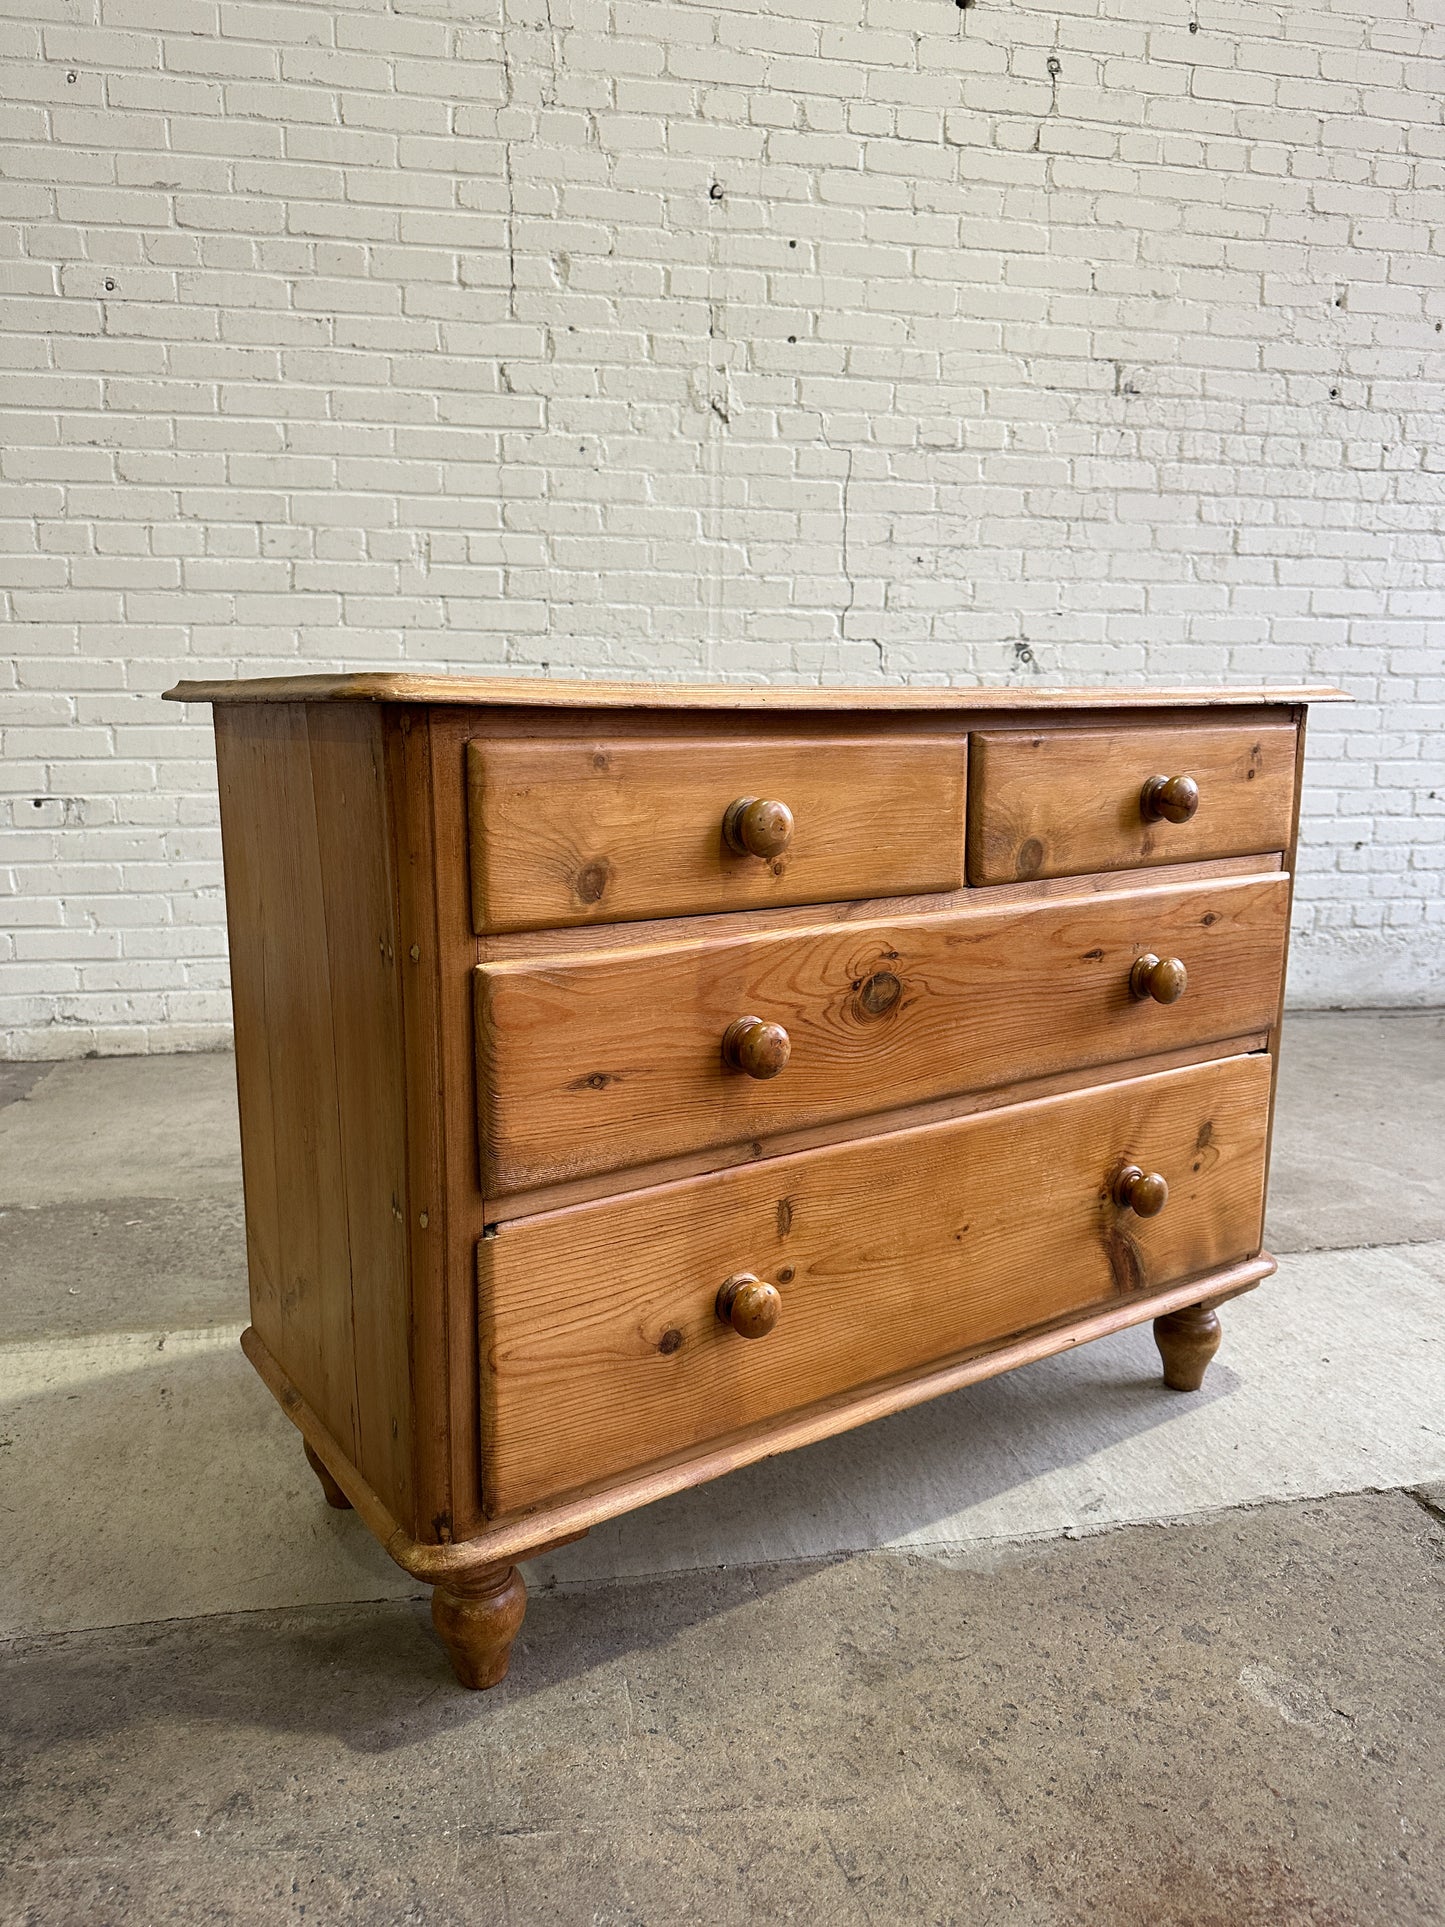 Antique Pine English Chest of Drawers c. 1880